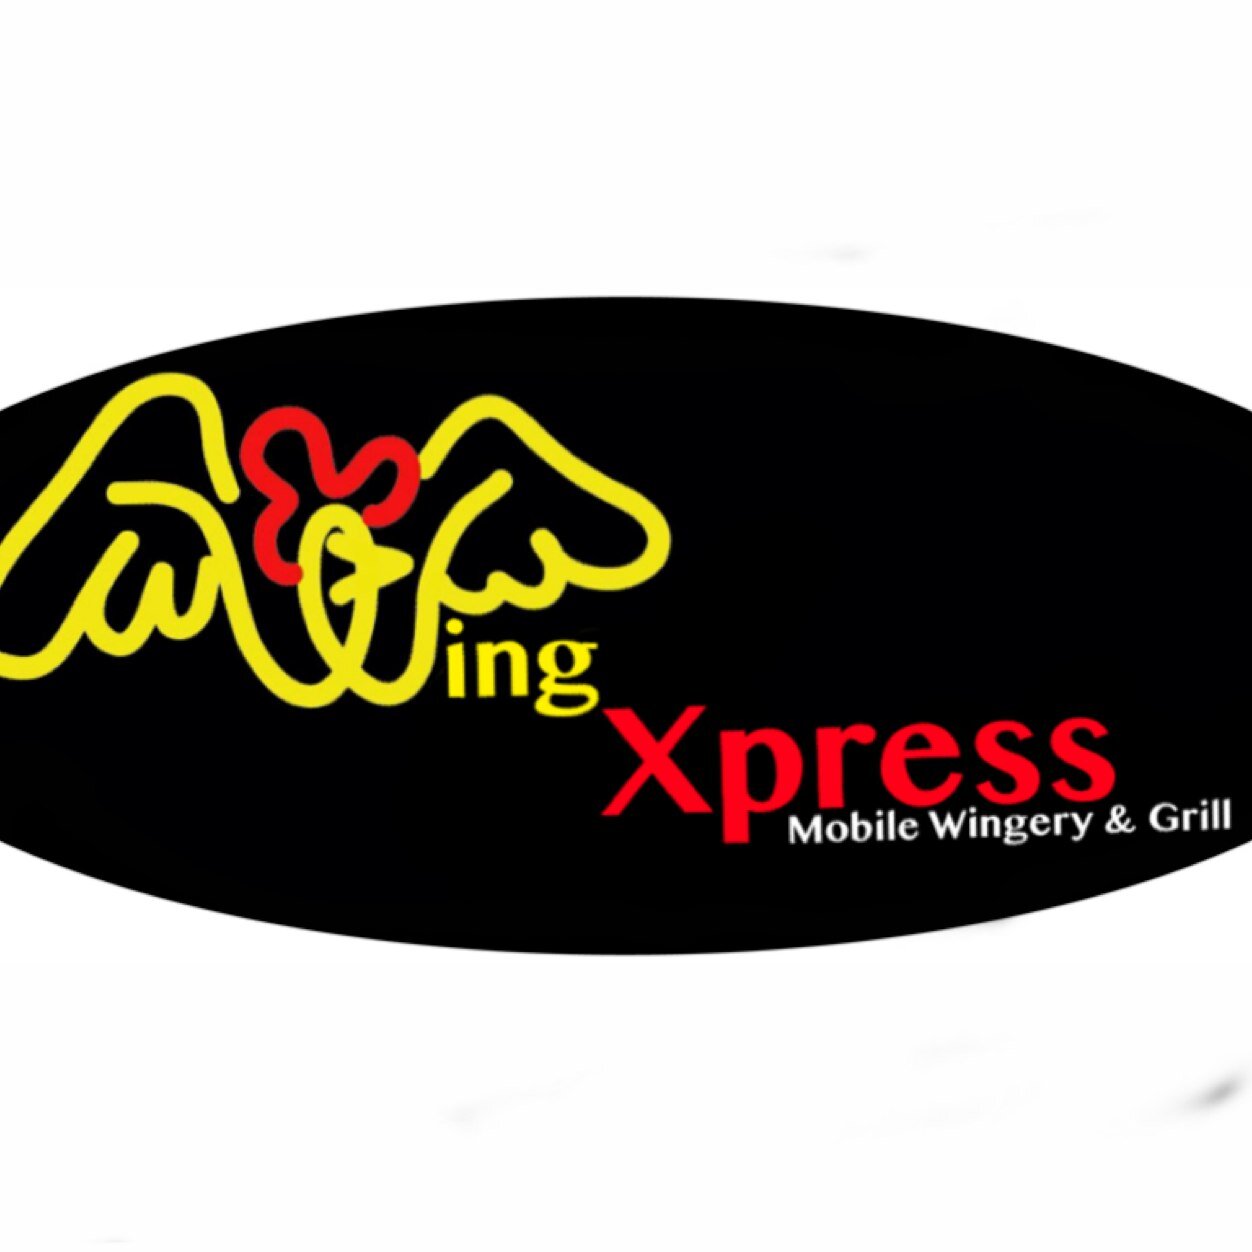 Official WingXpress Page! The only mobile wingery in the streets of San Antonio!!! Now delivery in select locations. Catoring/corporate lunches (210) 764-9351